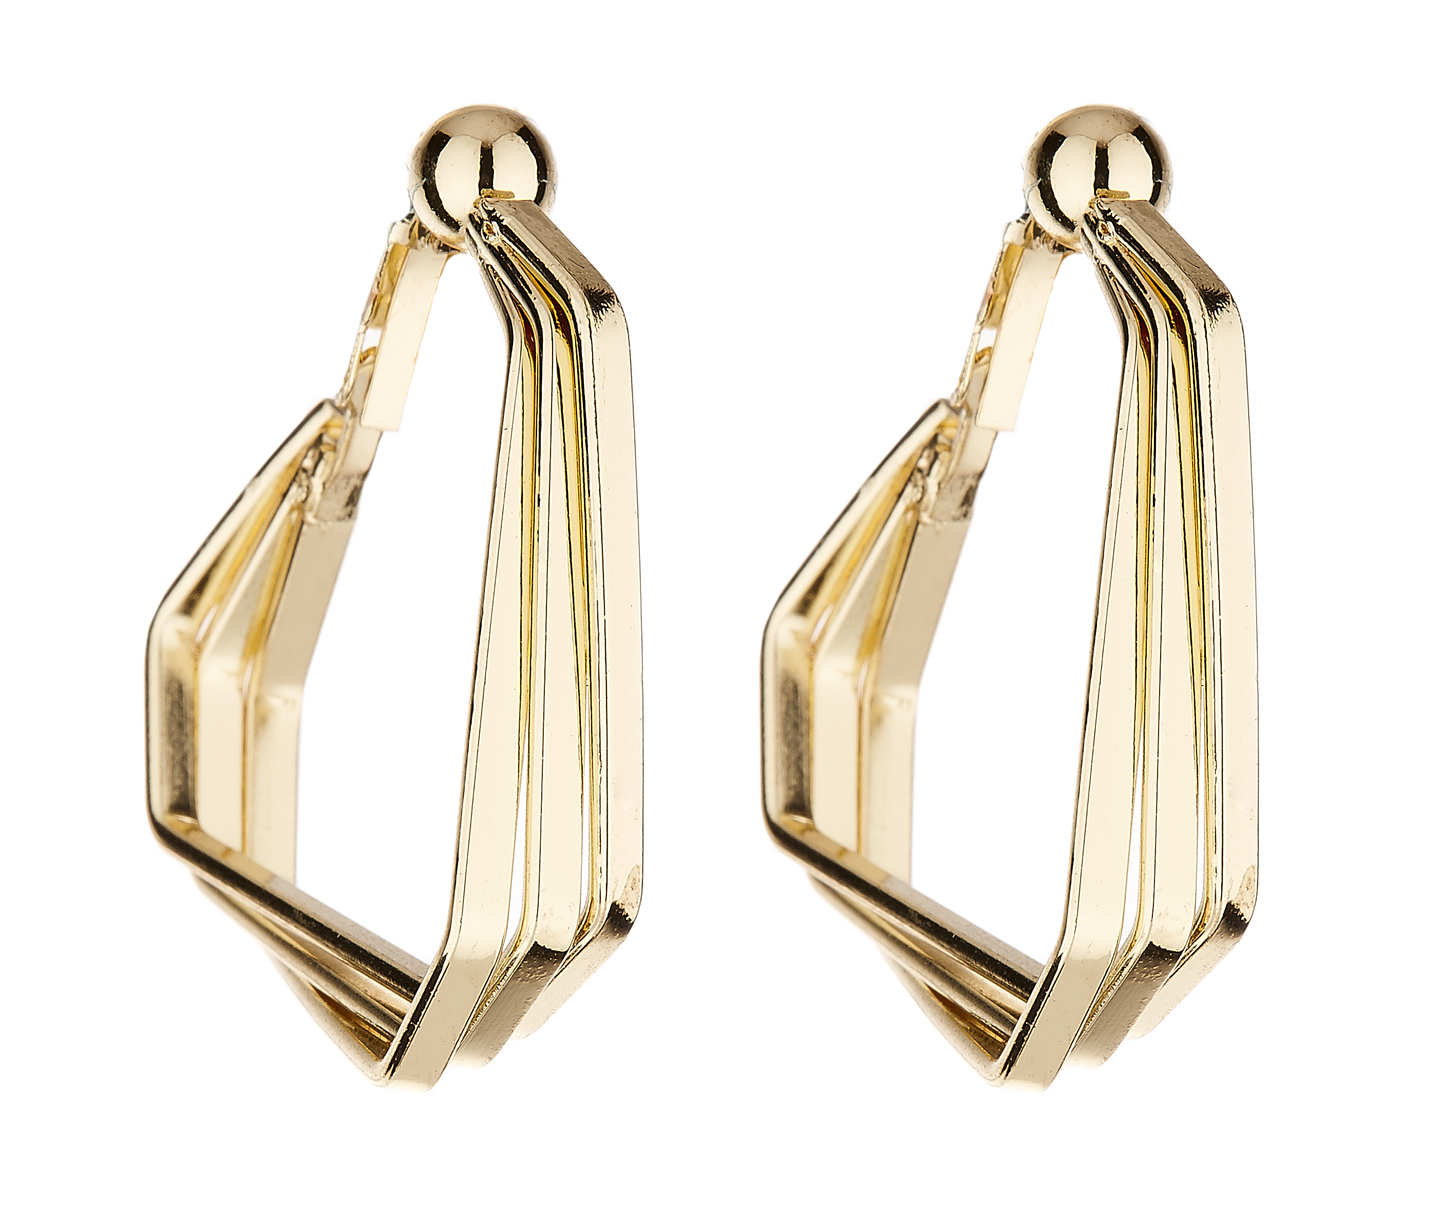 Clip On Earrings - Deka - gold hoop earring with three linked bands